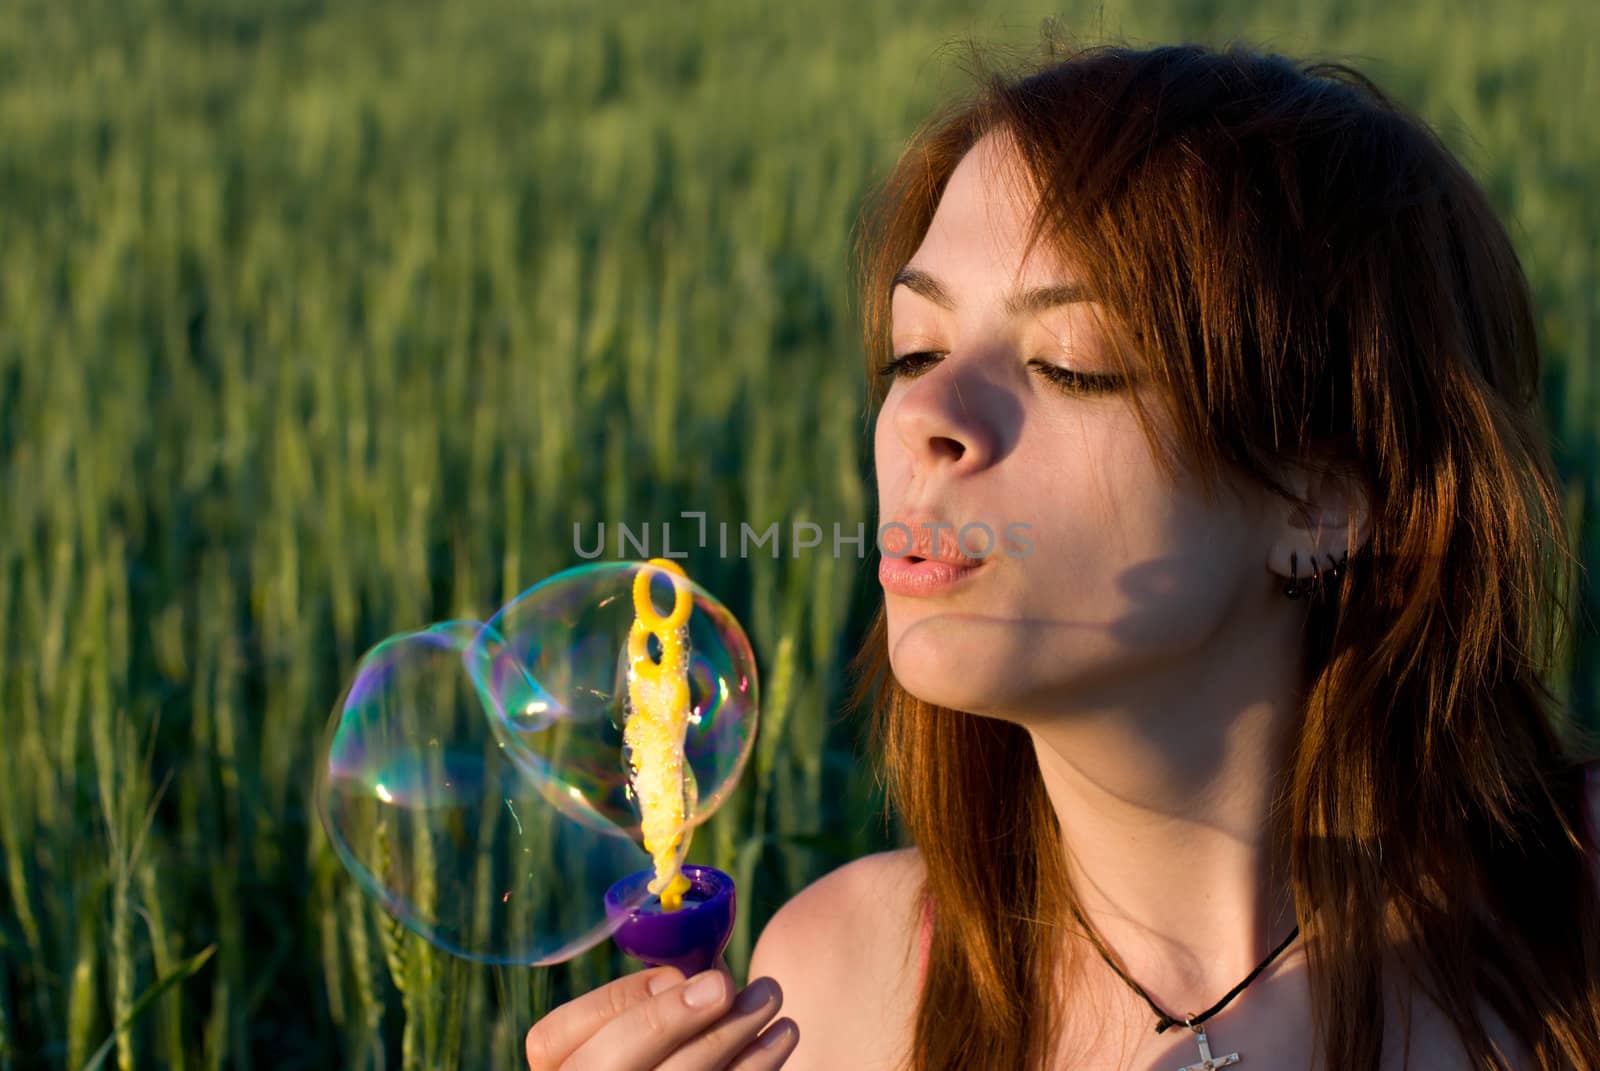 A young woman blowing bubbles